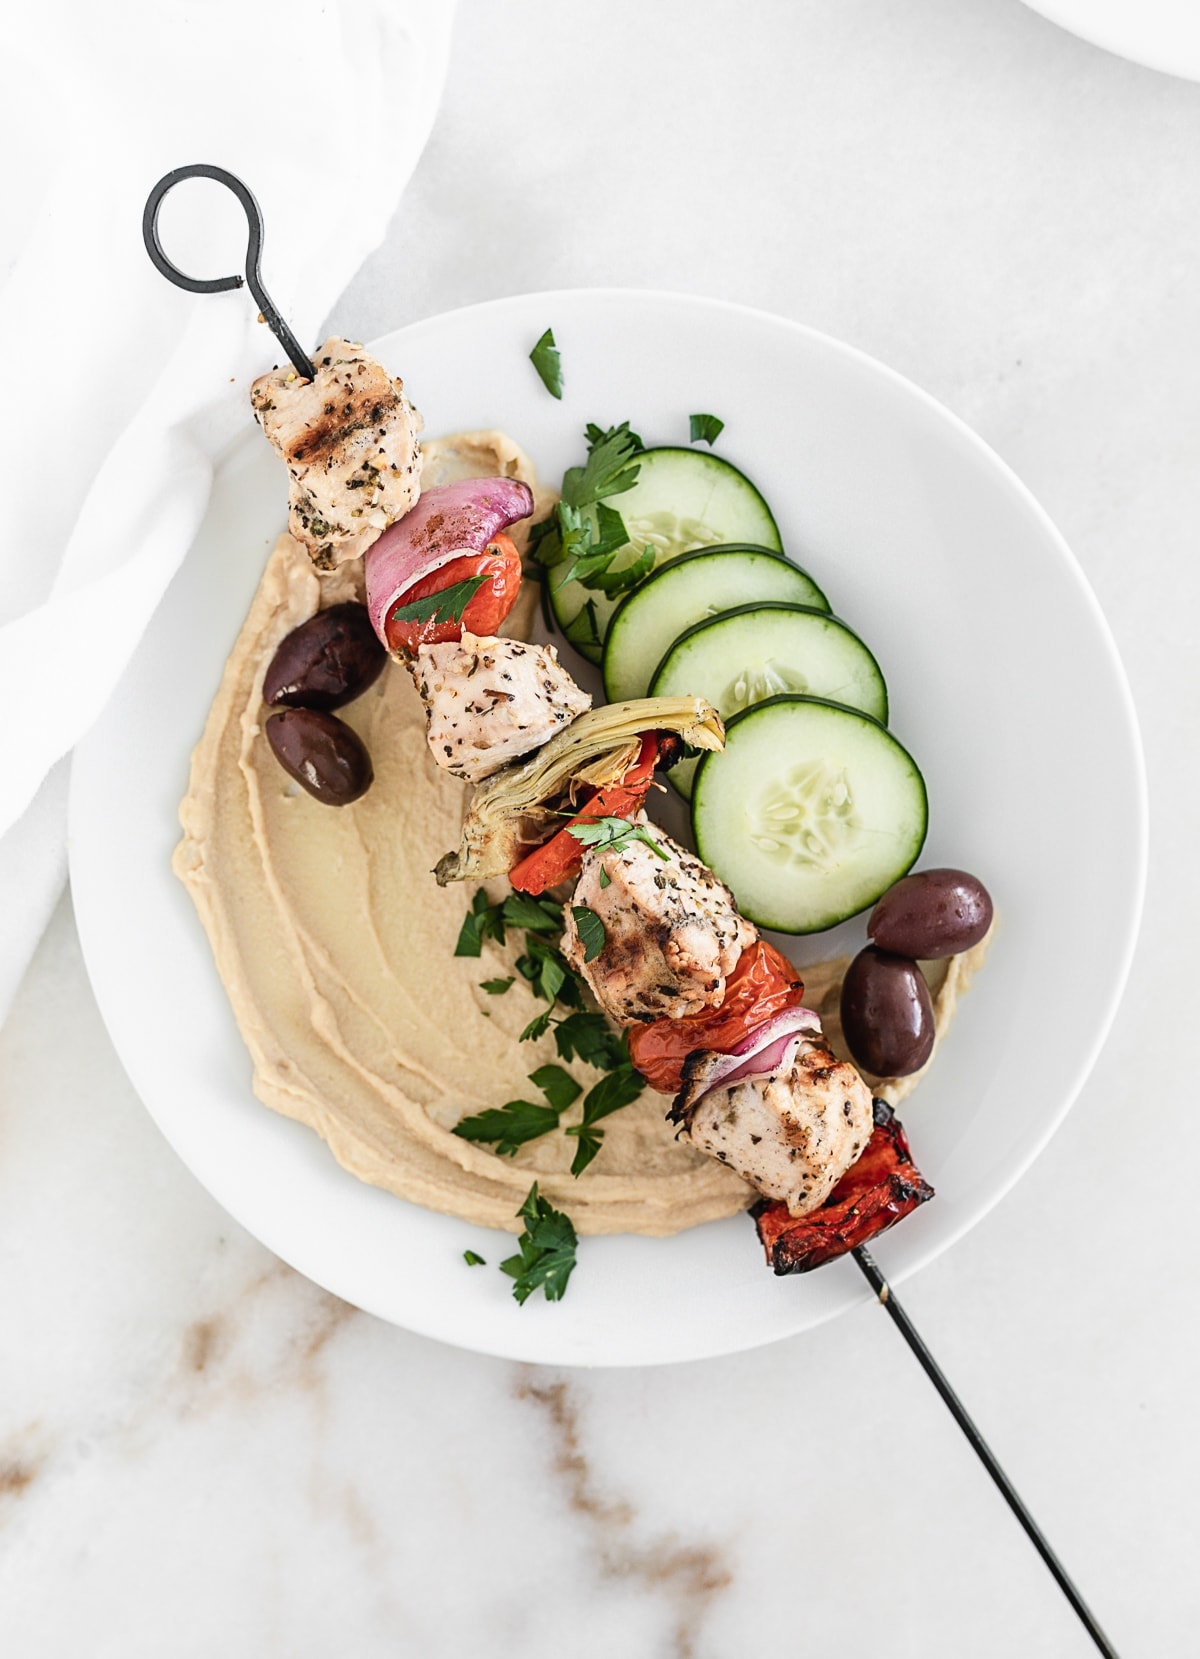 Overhead view of Mediterranean chicken kabob with hummus, cucumbers, and olives on a white plate.